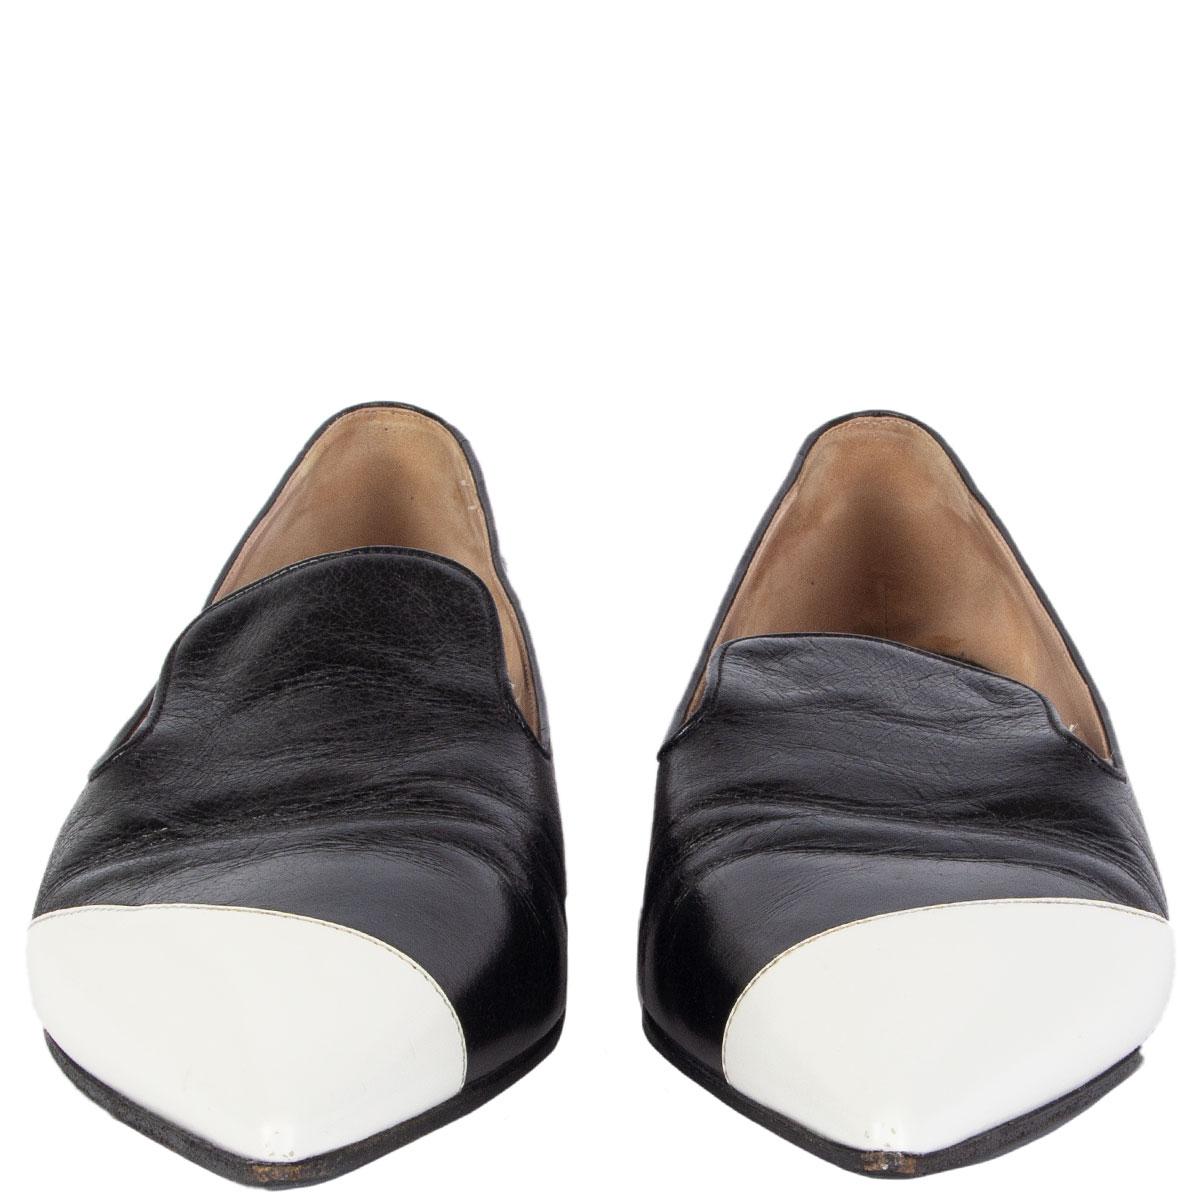 100% authentic Miu Miu pointed-toe flats in black calfskin with a white tip. Have been worn with a faint mark on the right tip on the side. Overall in excellent condition. 

Measurements
Imprinted Size	38
Shoe Size	38
Inside Sole	25.5cm